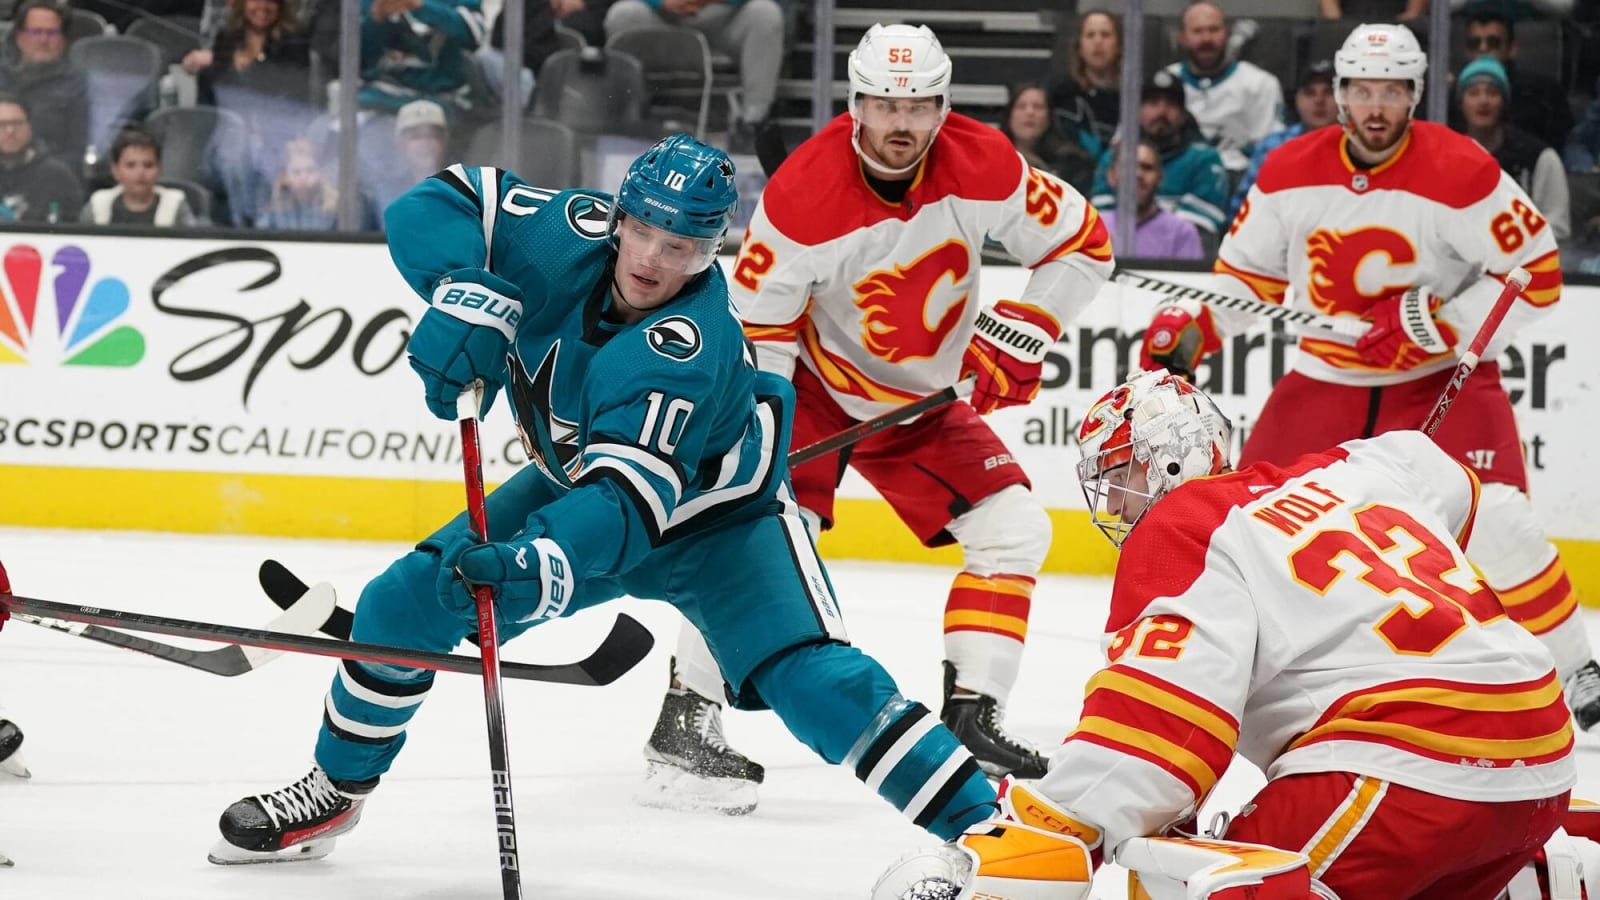 Flames overcome slow start, slay Sharks with special teams